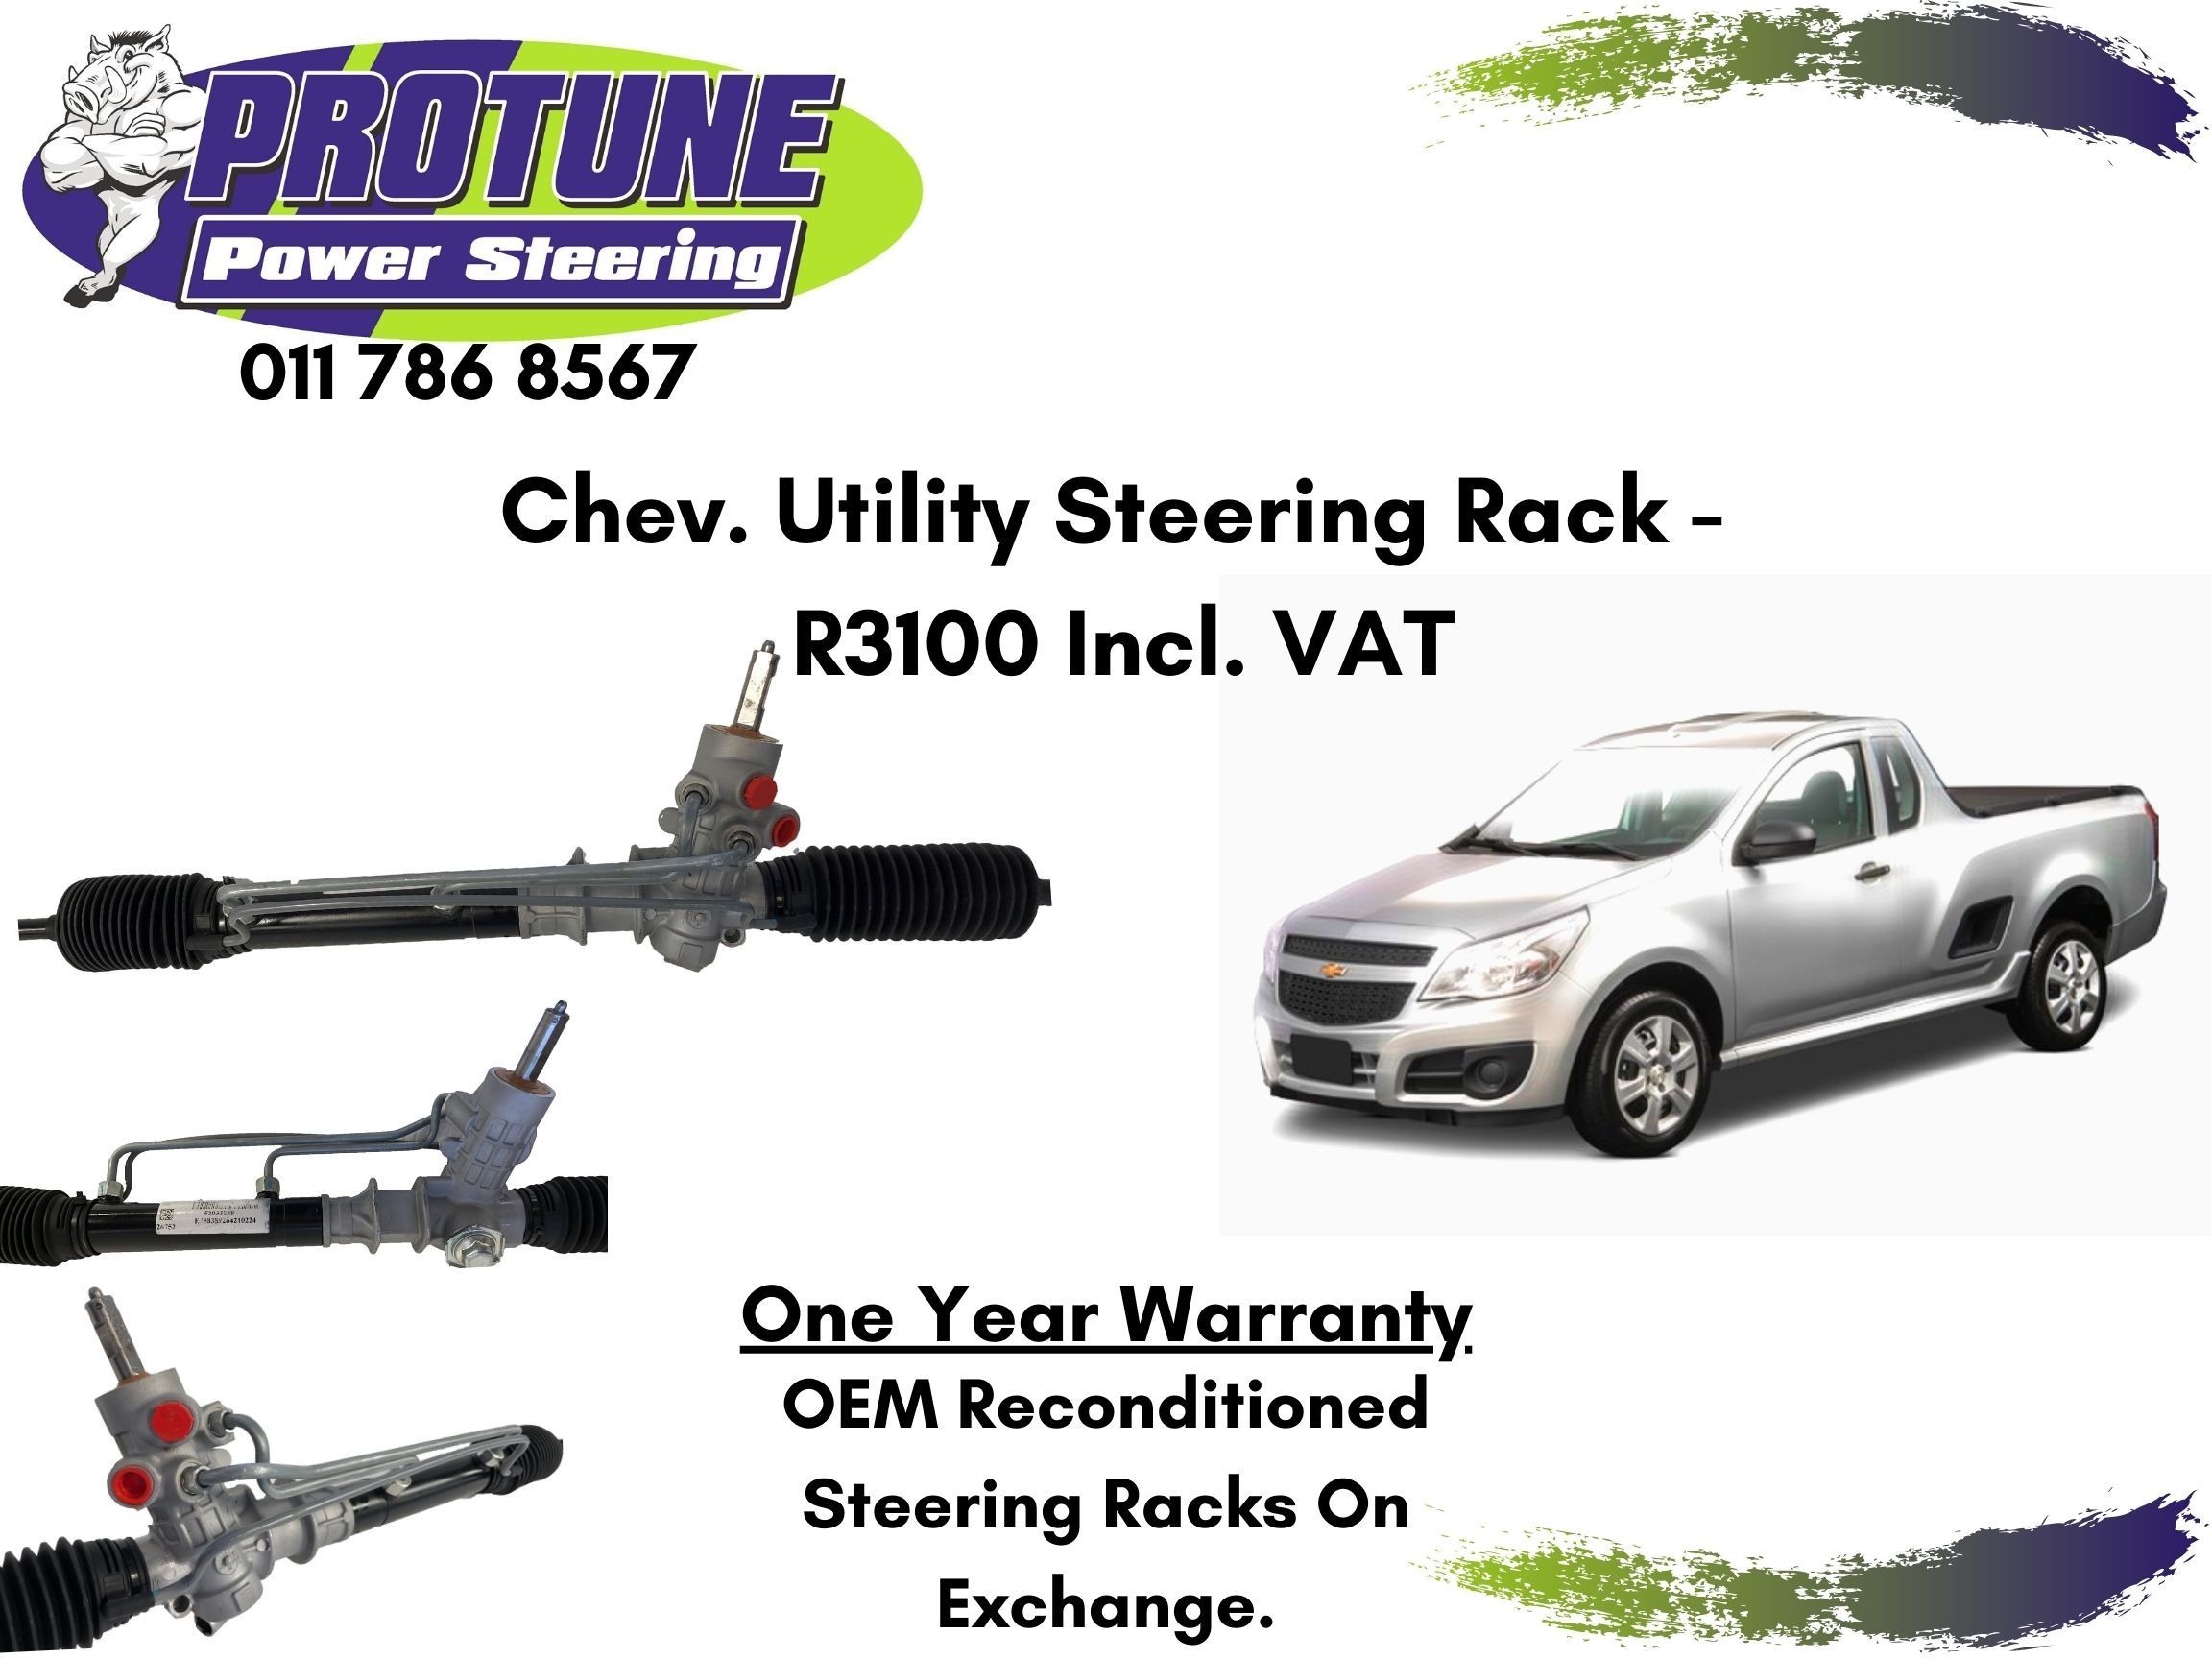 Chev Utility  OEM Reconditioned Steering Rack